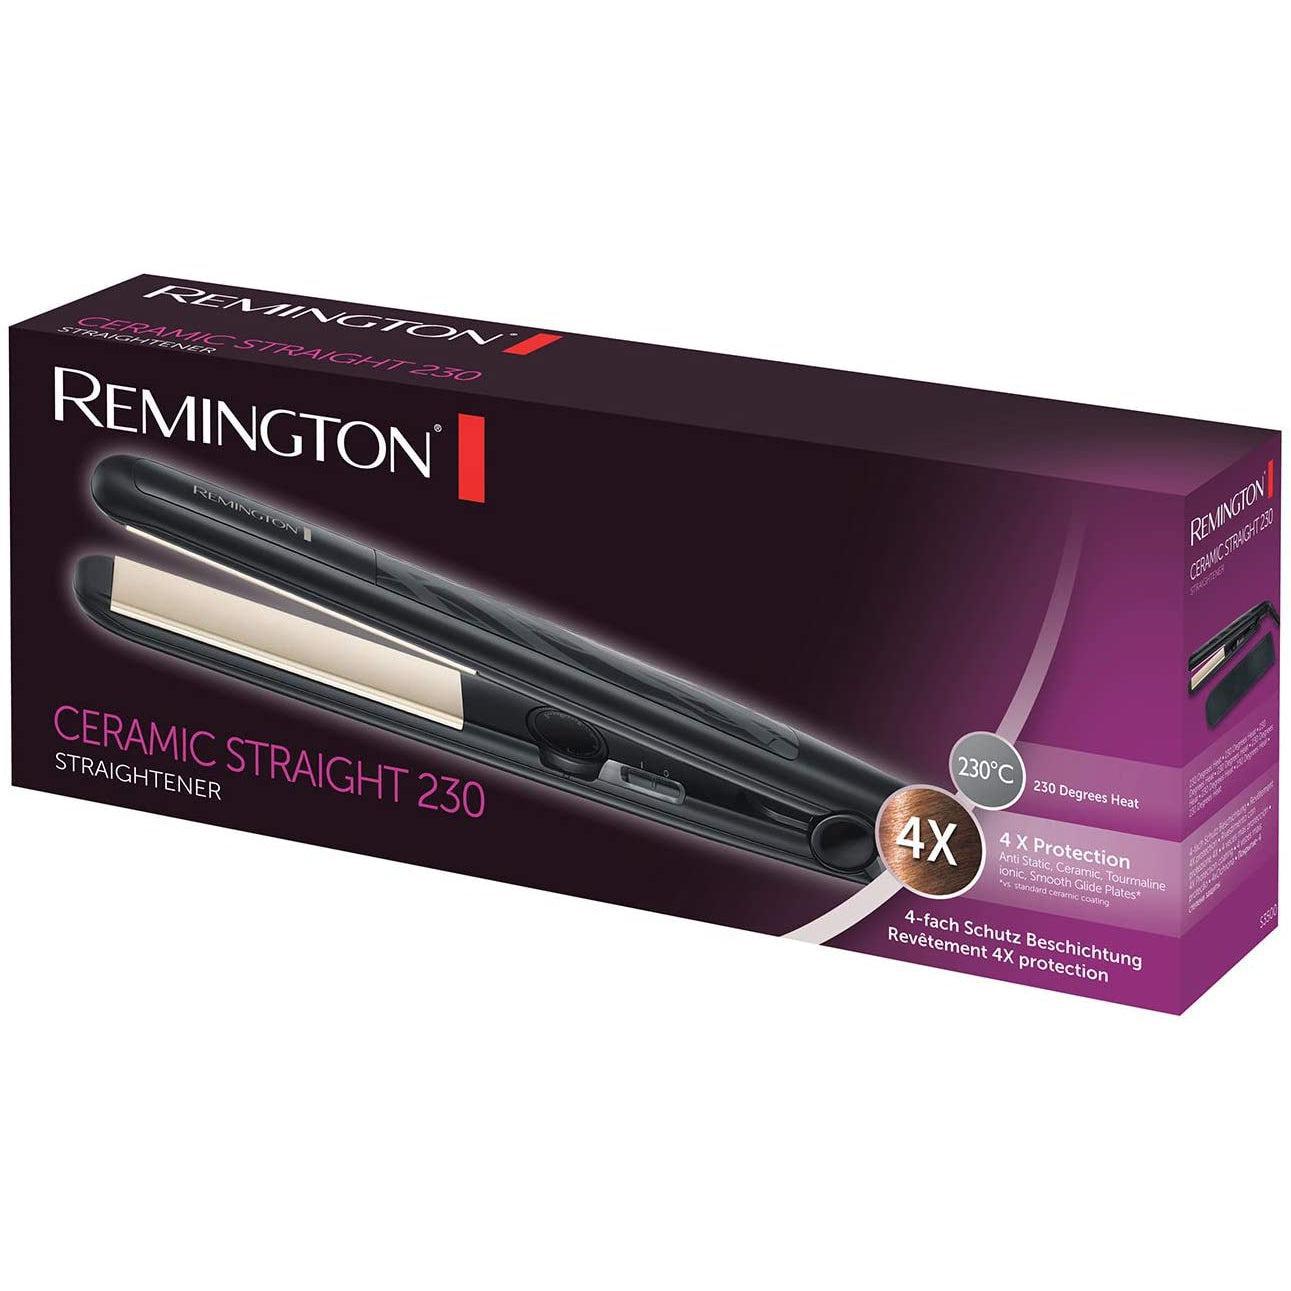 Remington Ceramic Straight 230 Hair Straighteners, 15 Seconds Heat Up Time with Variable Temperature Setting - S3500 - Healthxpress.ie